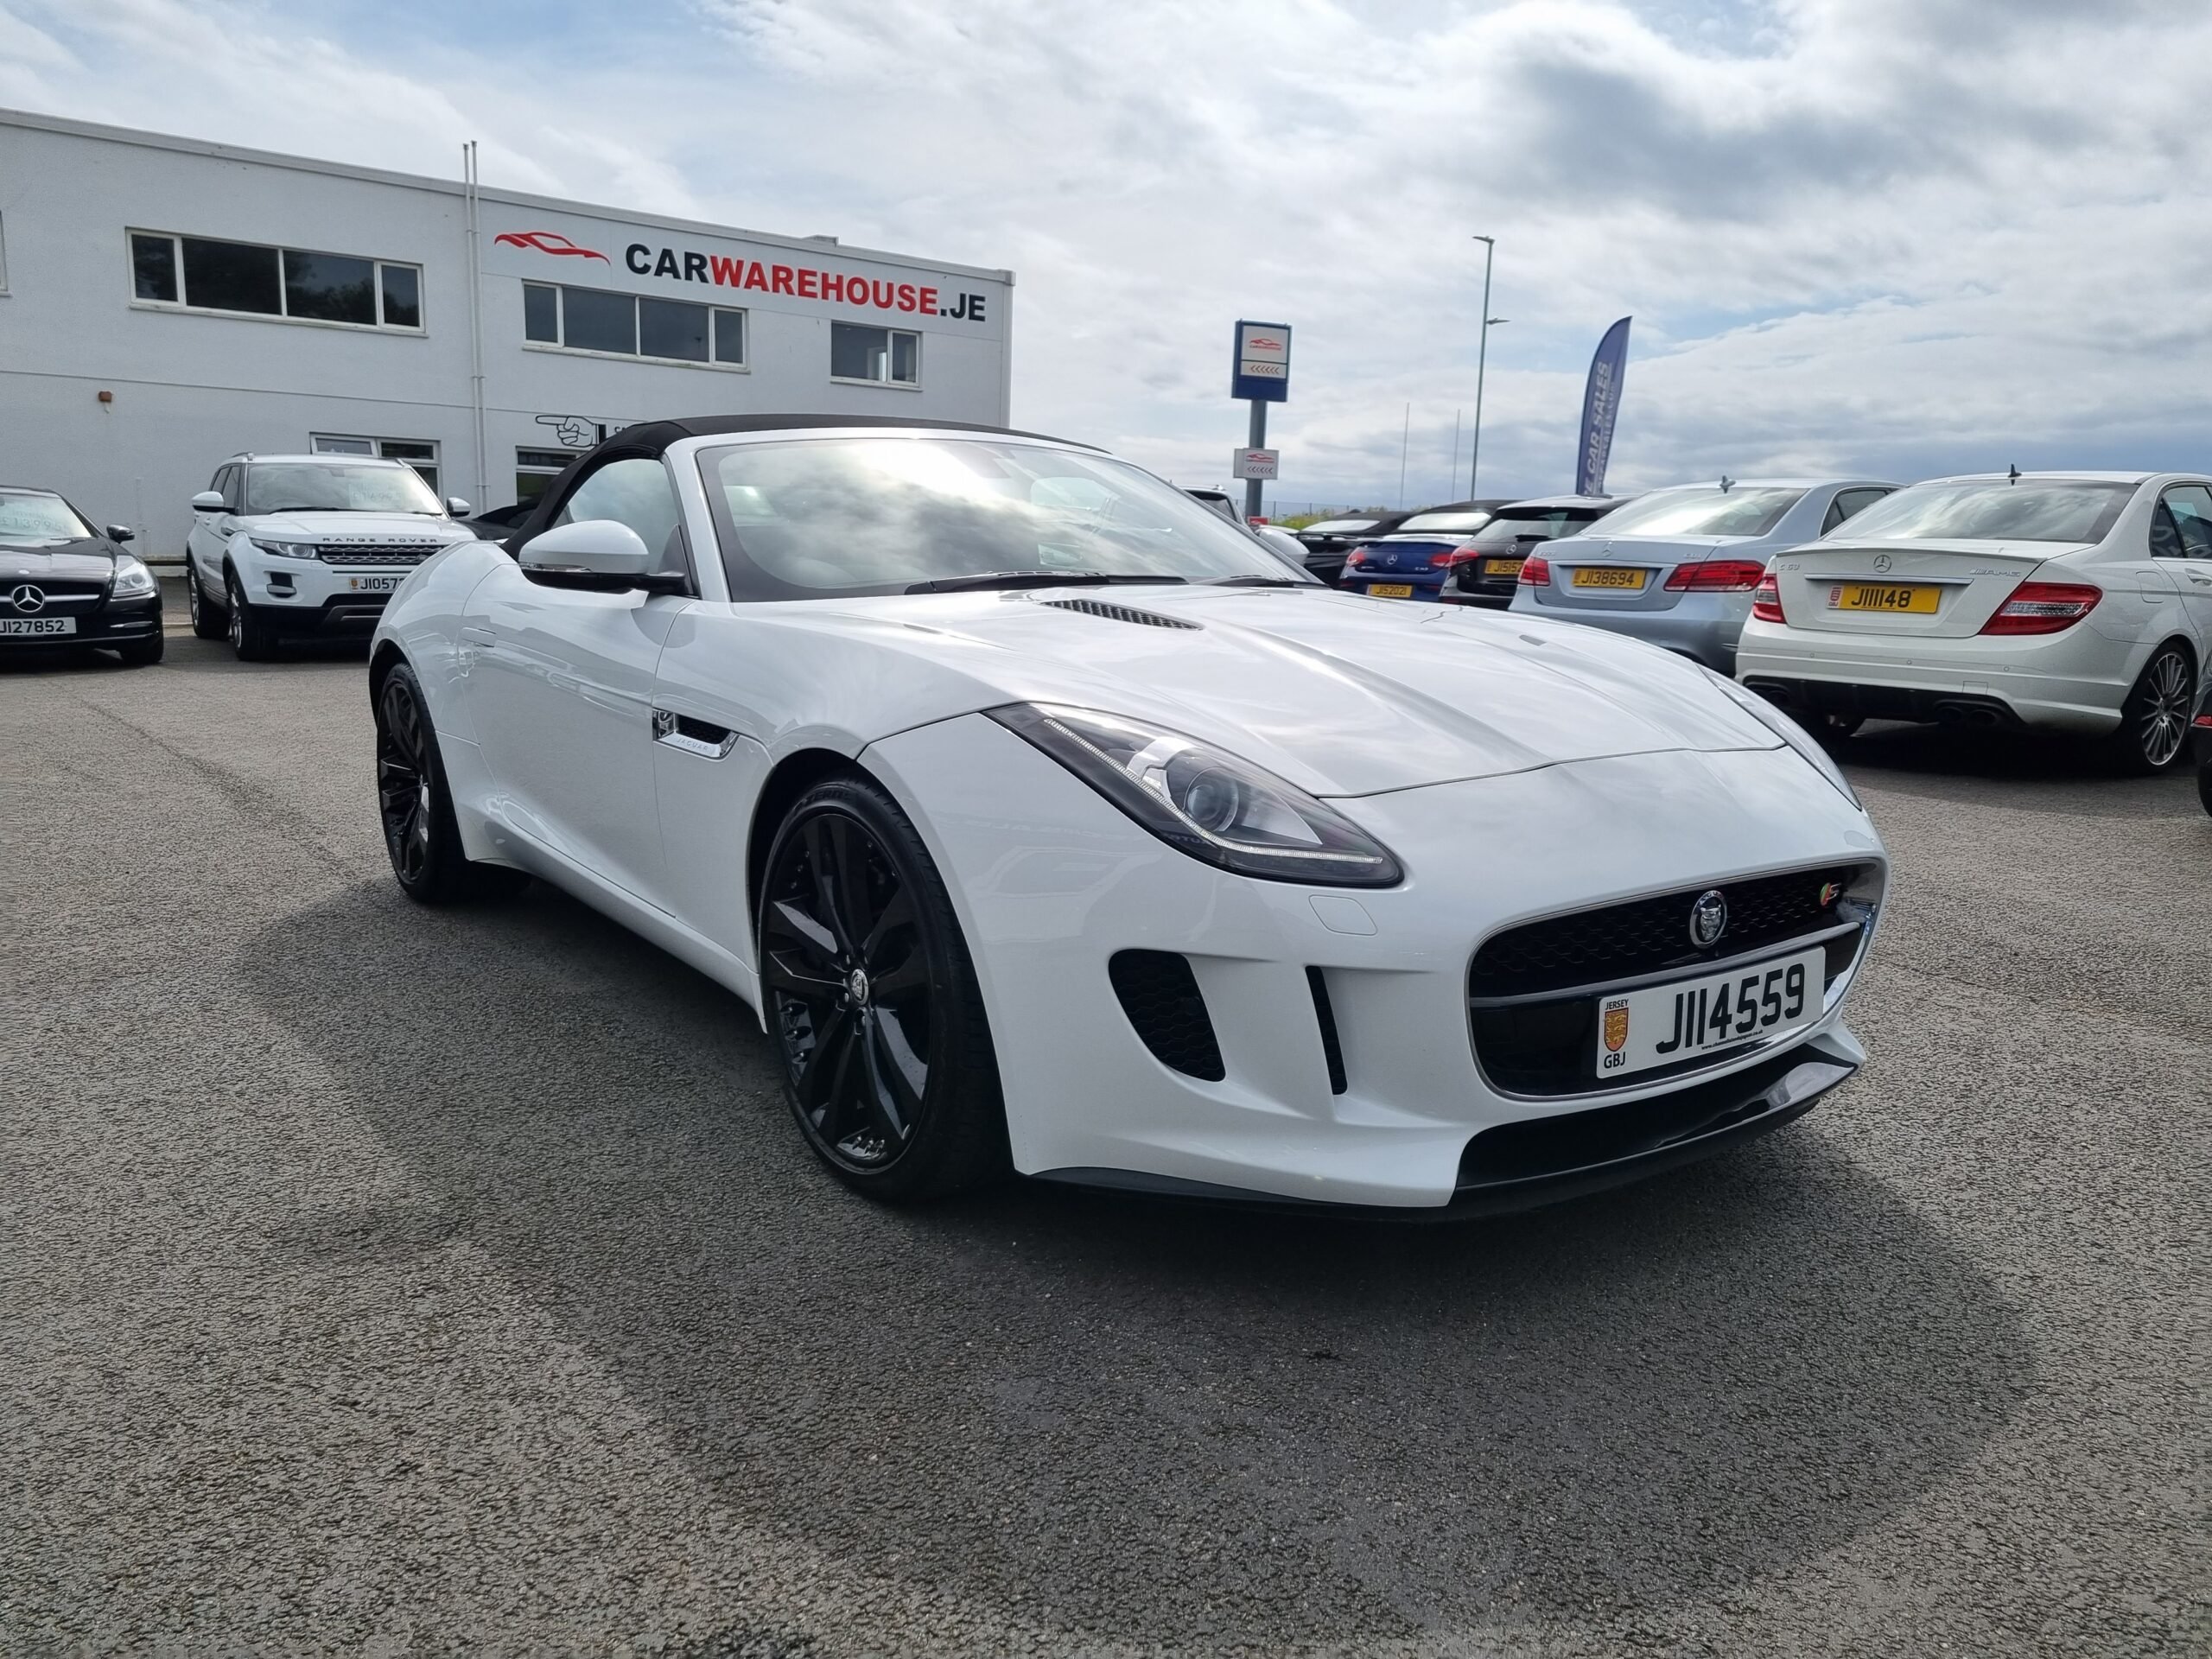 Reduced2014 Jaguar F Type S 30 V6 375bhp Quickshift Automatic Only 6300 Milesconvertiblevery Nice Examplenow Only 29995 9